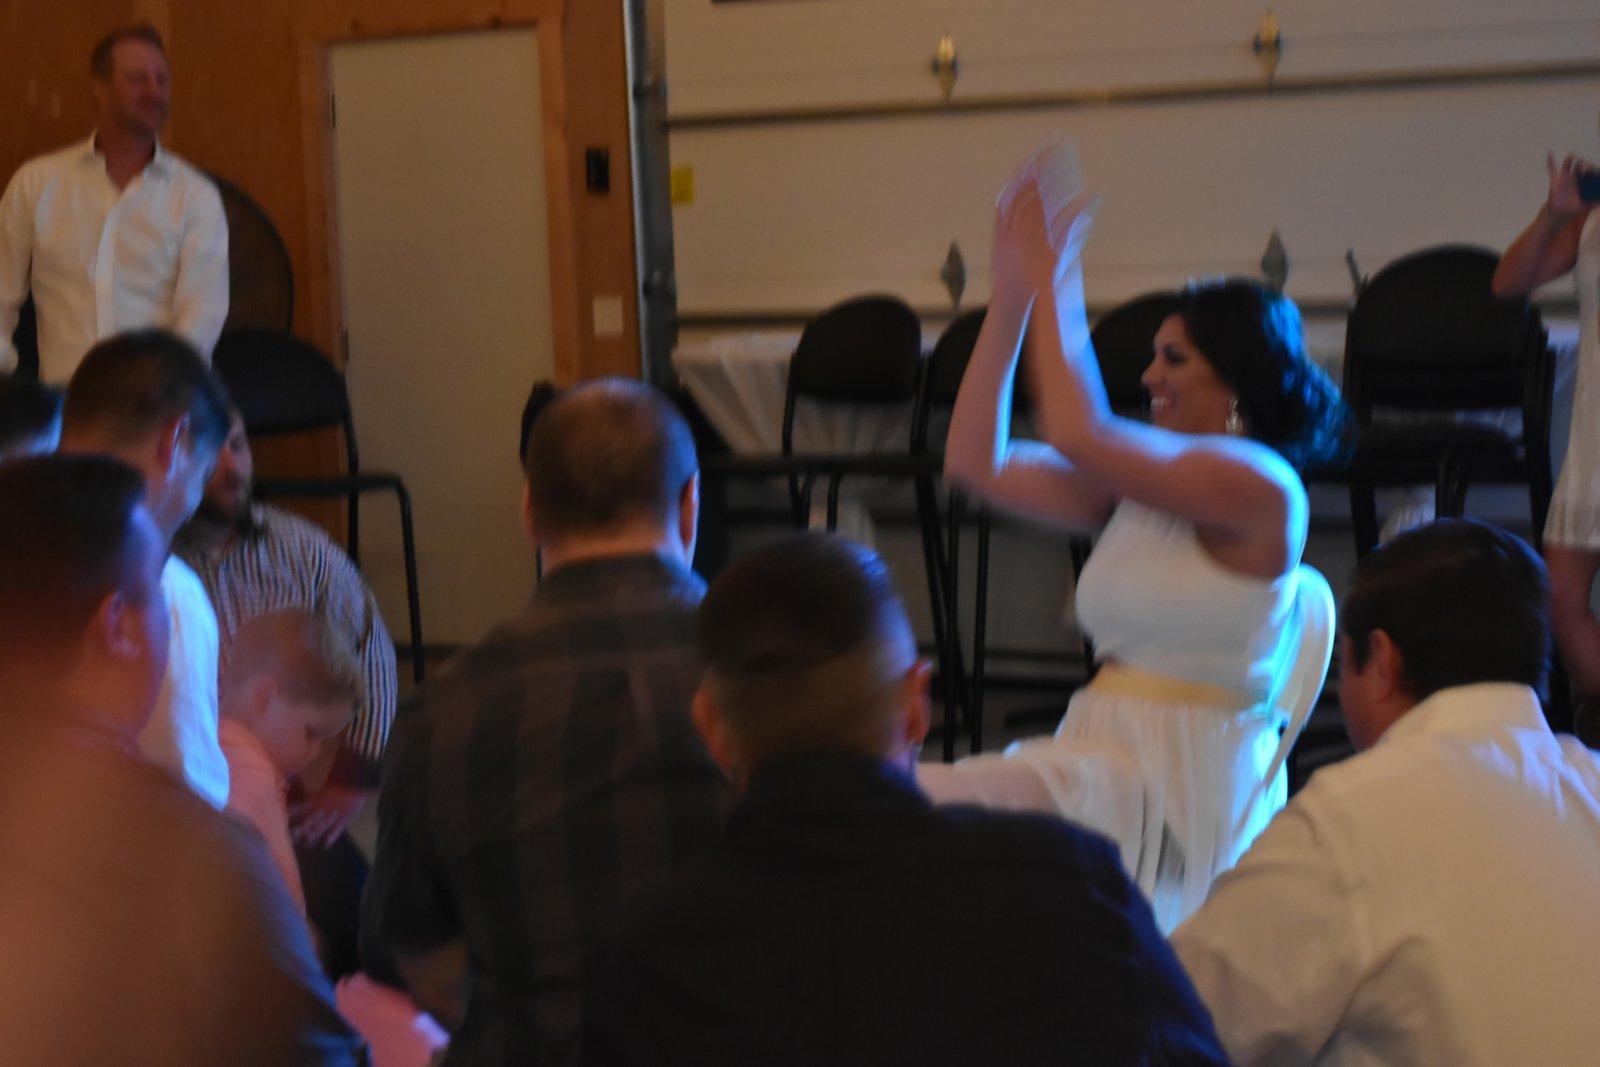 Singing a romantic song to the bride. Even Buddie's back looks uncomfortable. 